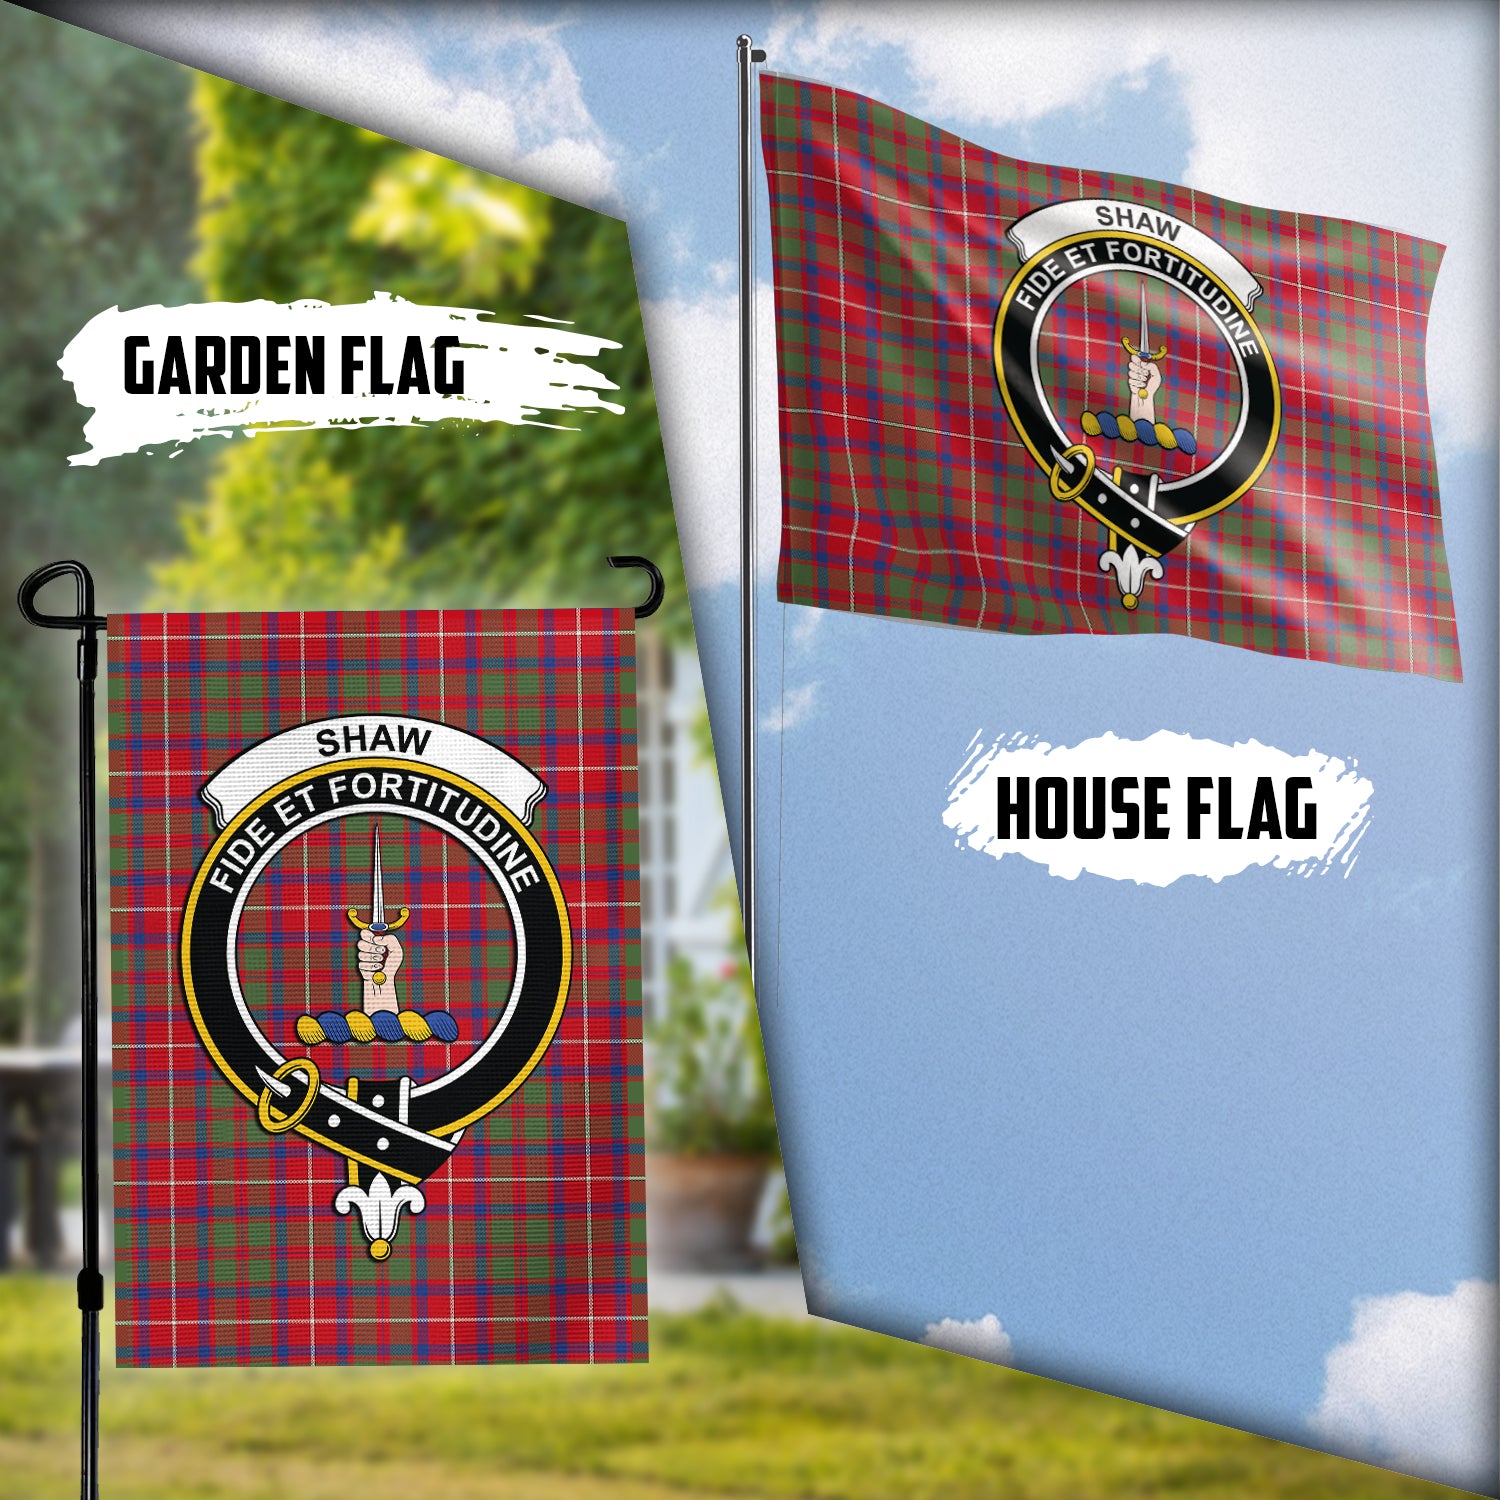 shaw-red-modern-tartan-flag-with-family-crest